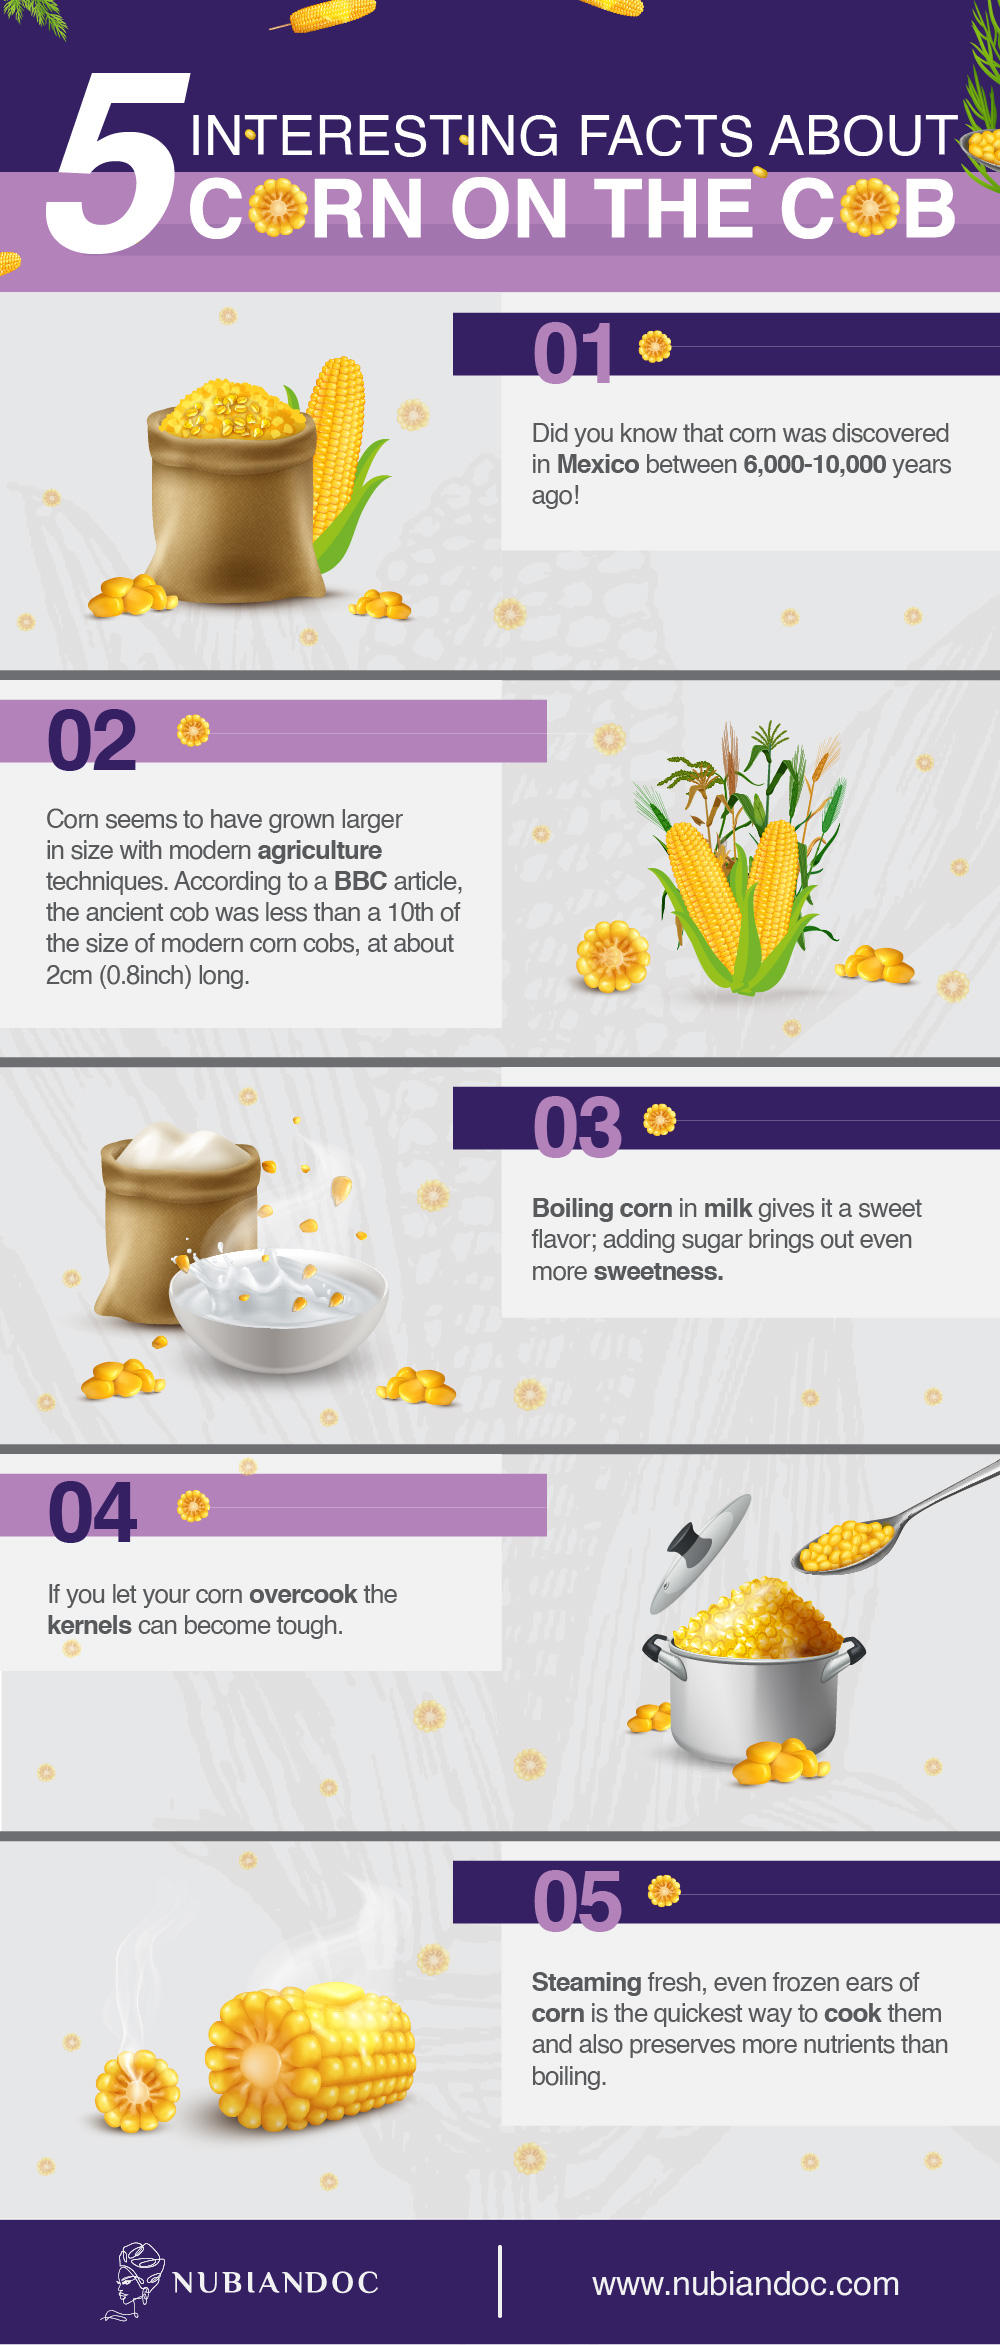 5 interesting facts about corn on the cob